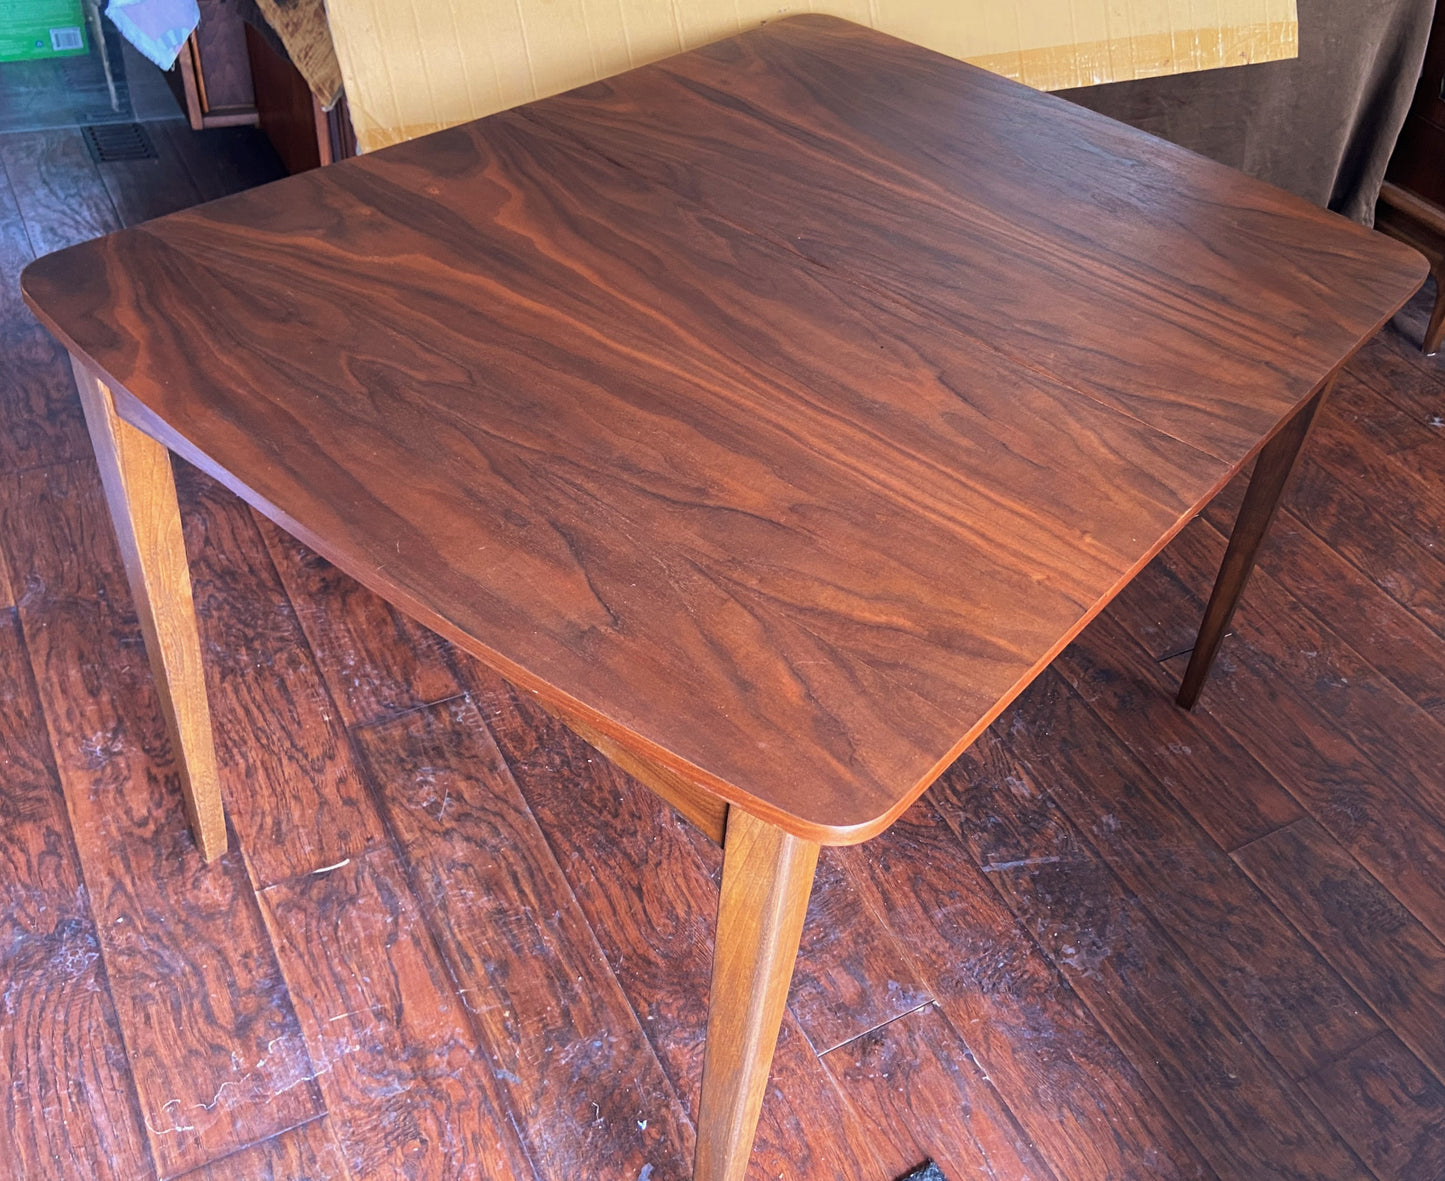 REFINISHED MCM Walnut Dining Table Extendable w 1 leaf, 4-5 ft